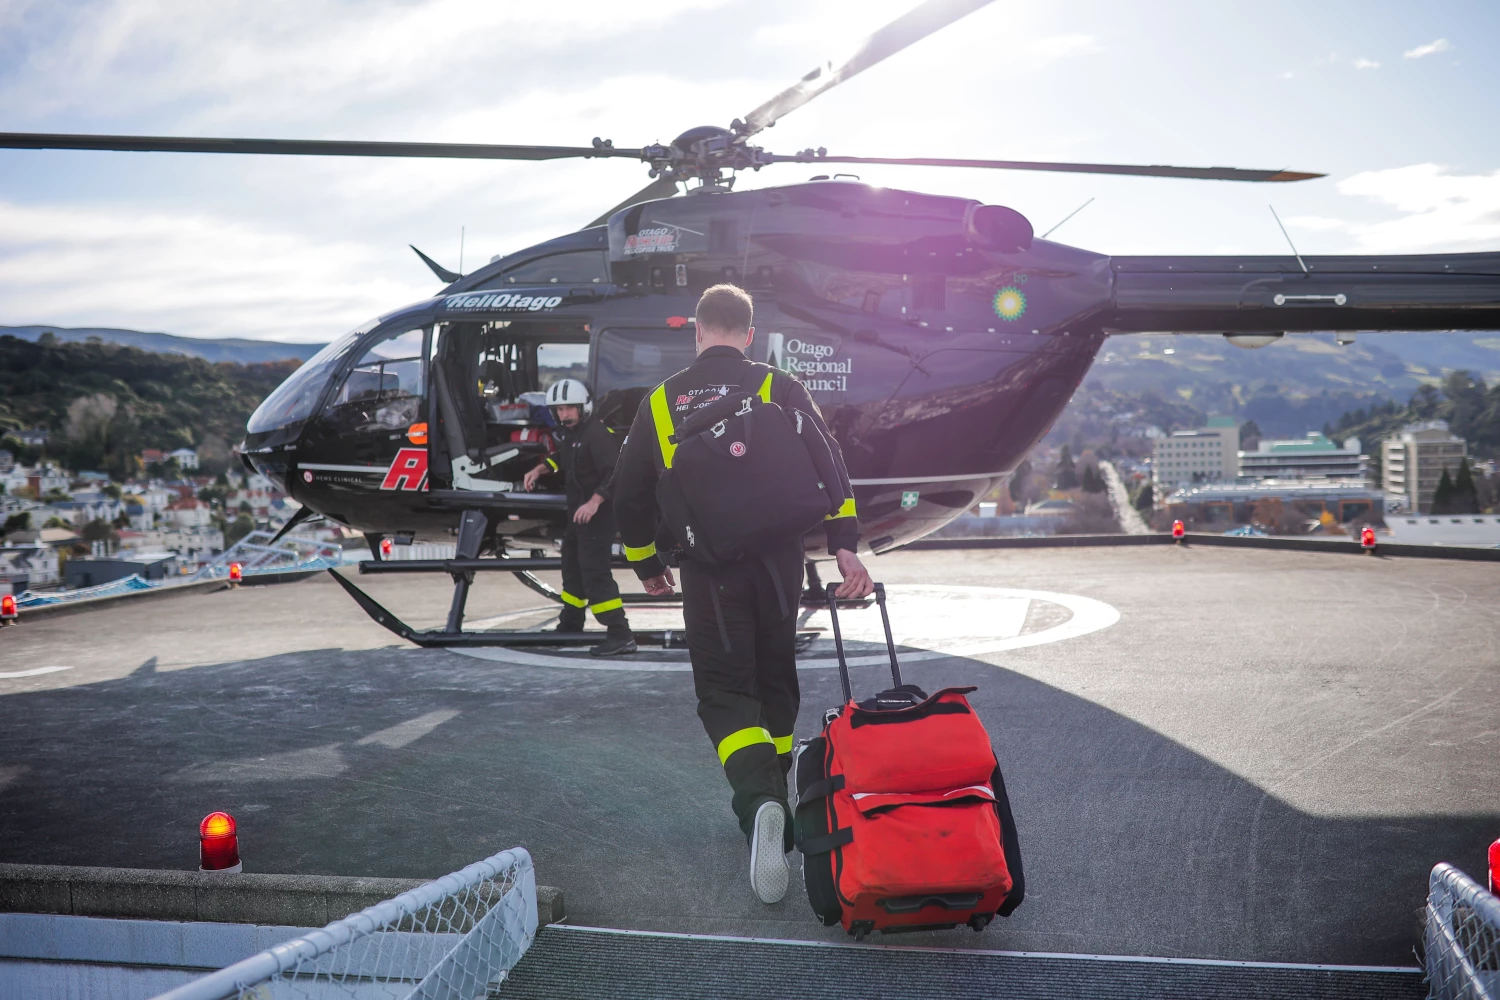 A Critical Care Specialist walking towards a rescue helicoopter on a hospital helipad